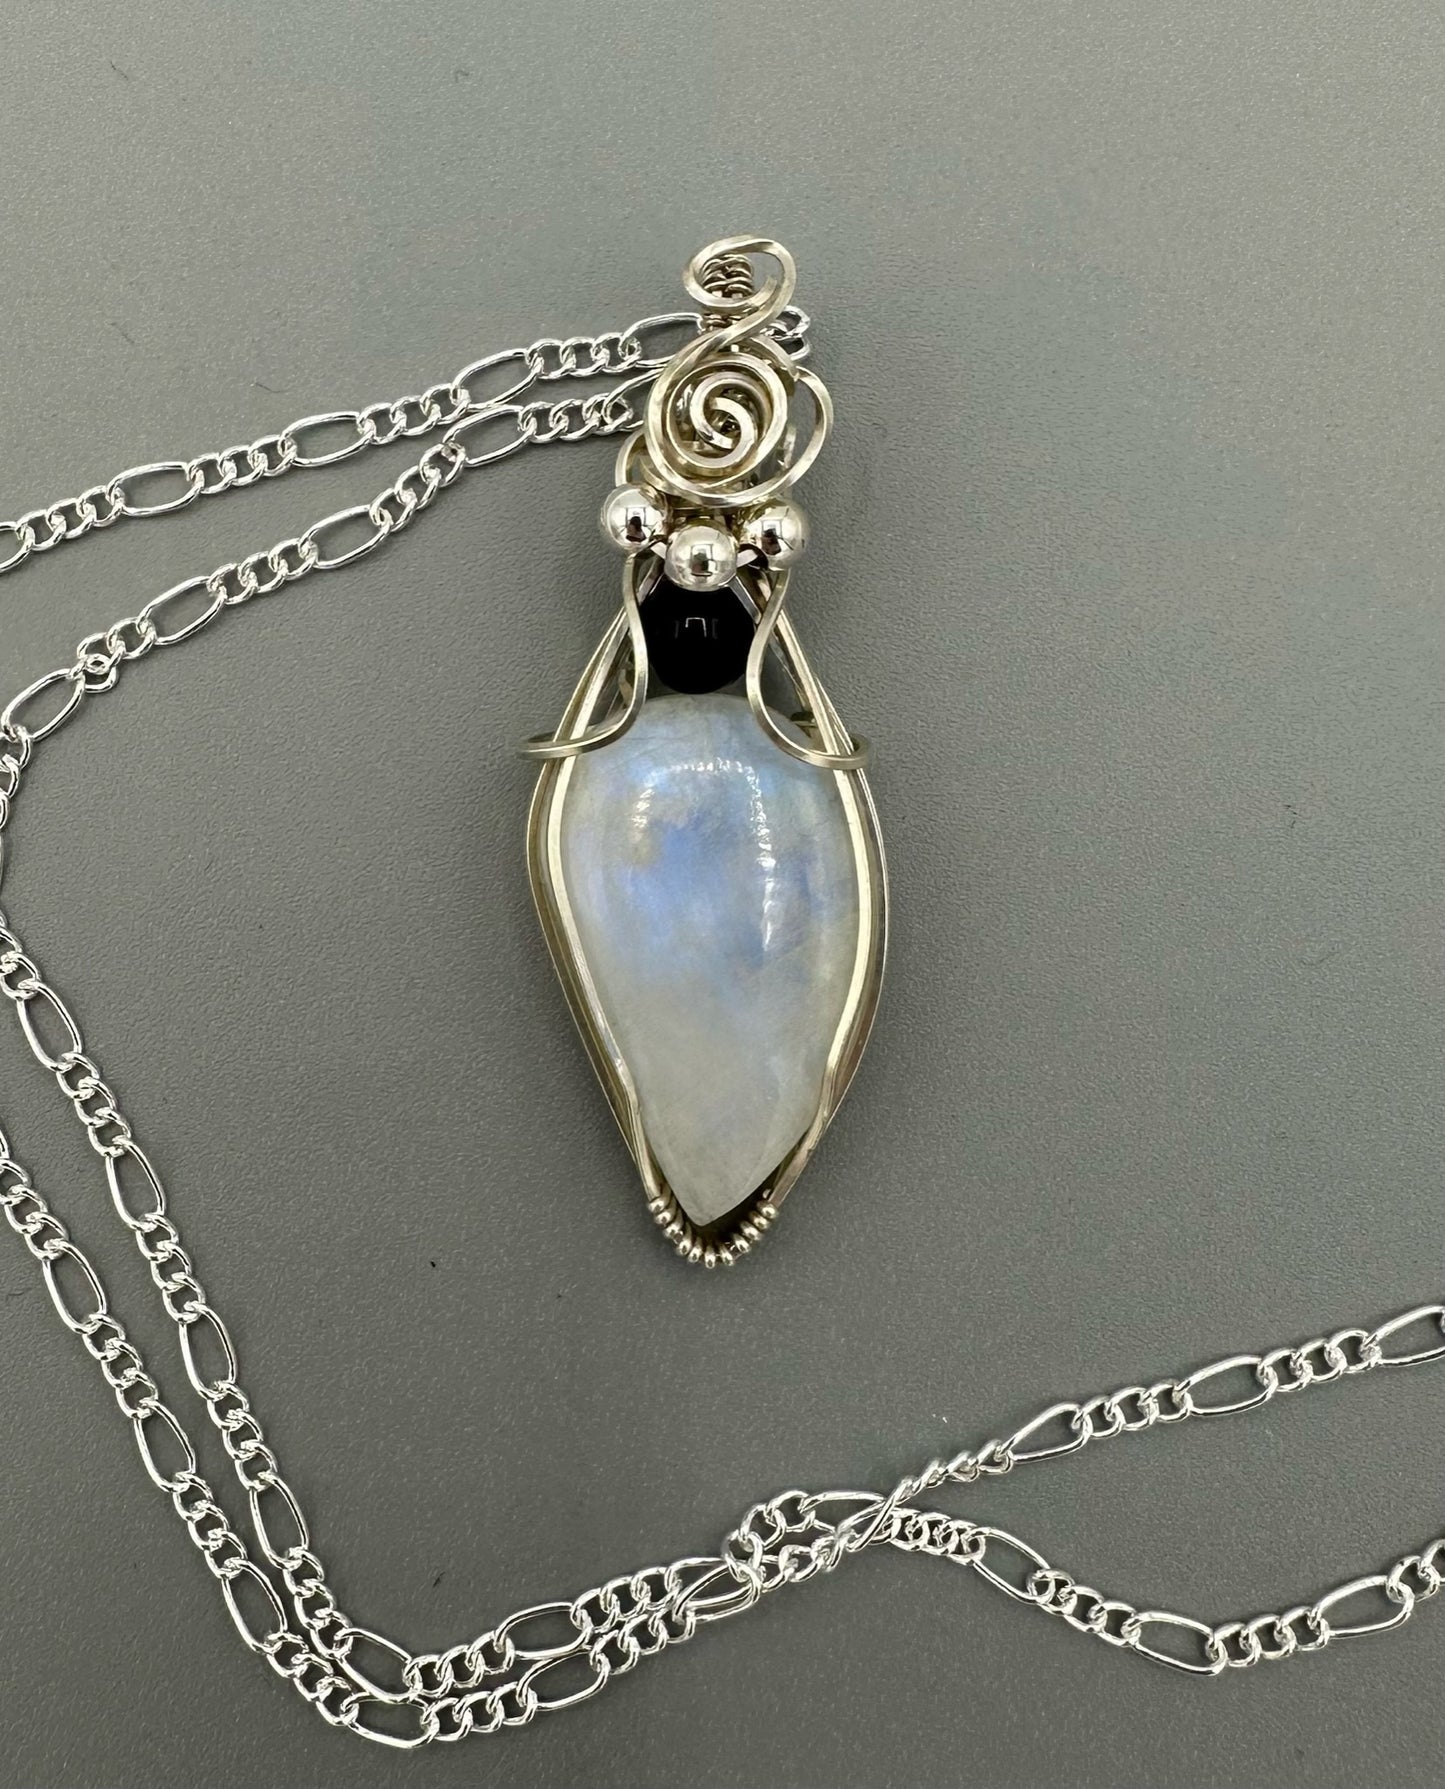 Irregularly Shaped Moonstone With Silver And Black Beads